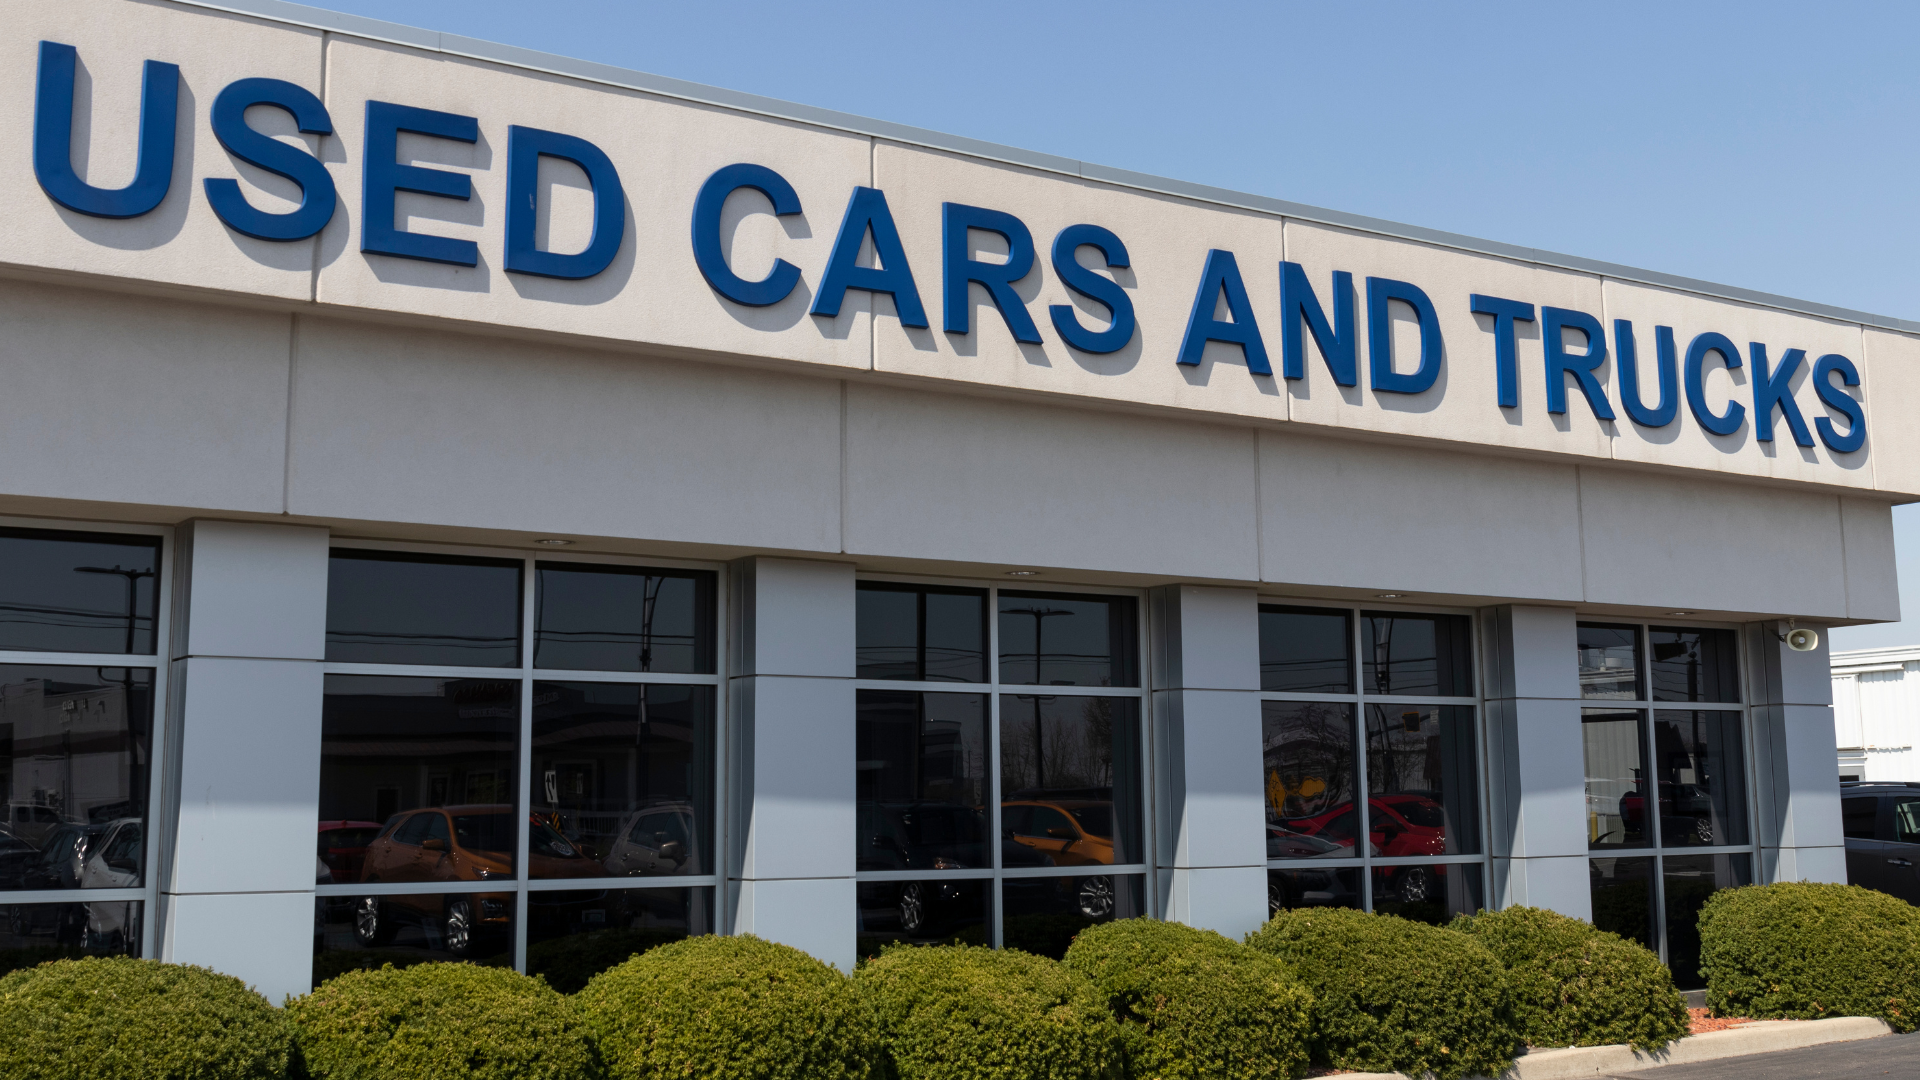 Used car and truck dealership